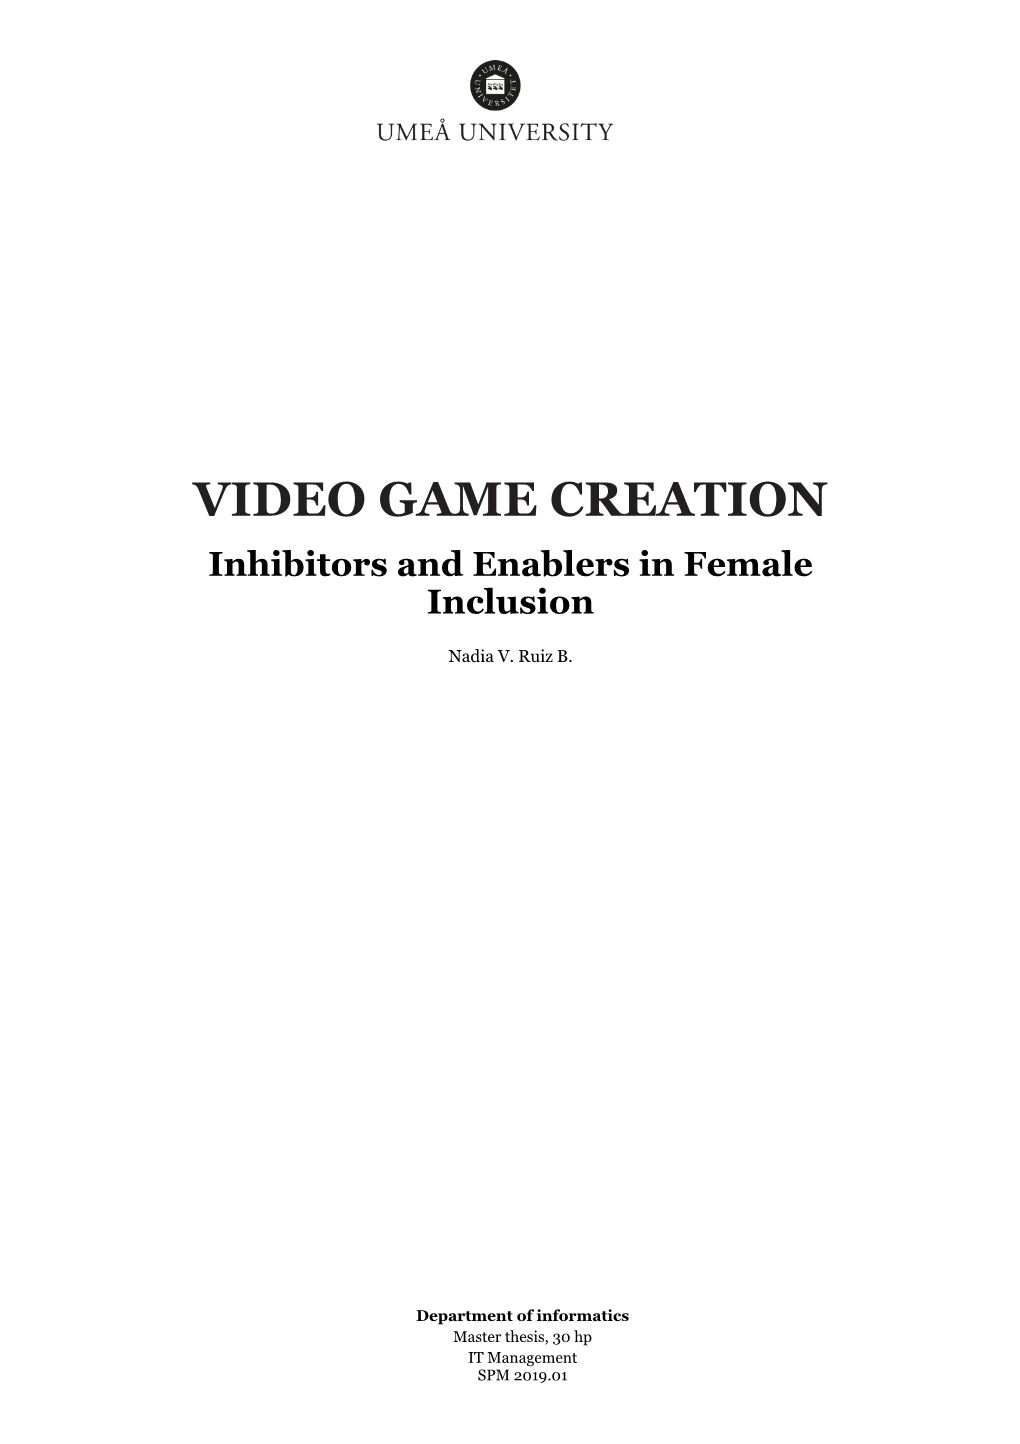 VIDEO GAME CREATION Inhibitors and Enablers in Female Inclusion